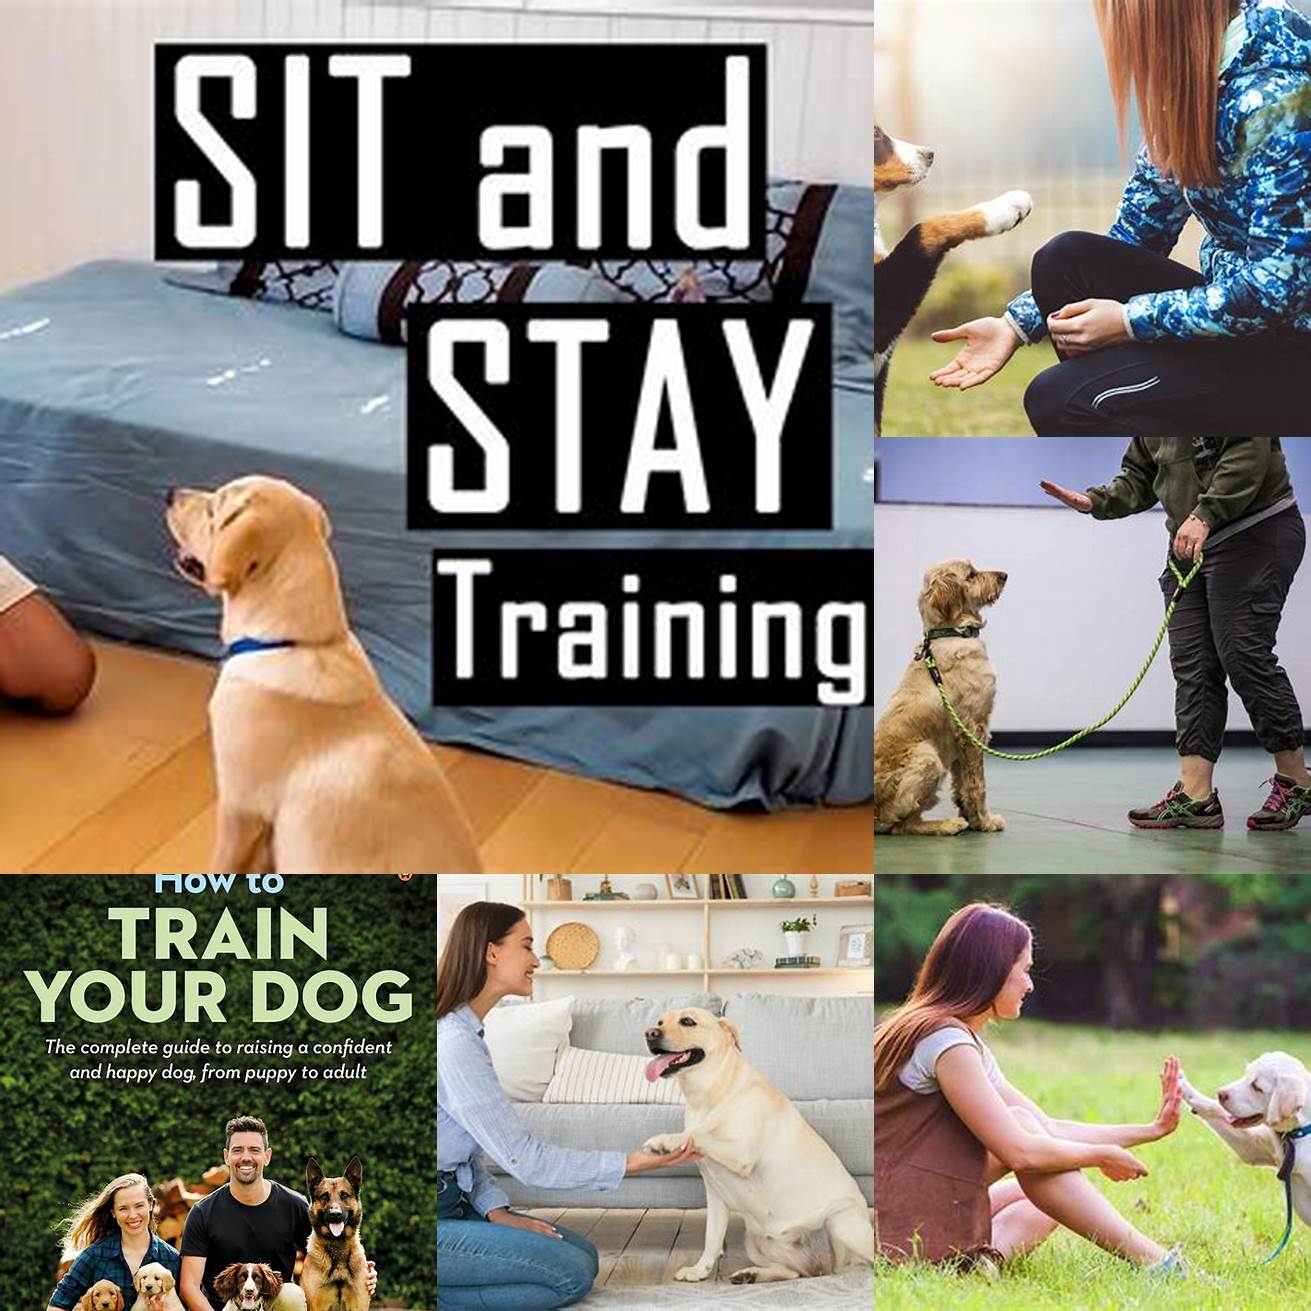 Train your dog If you have a dog make sure they are well-trained and socialized around cats